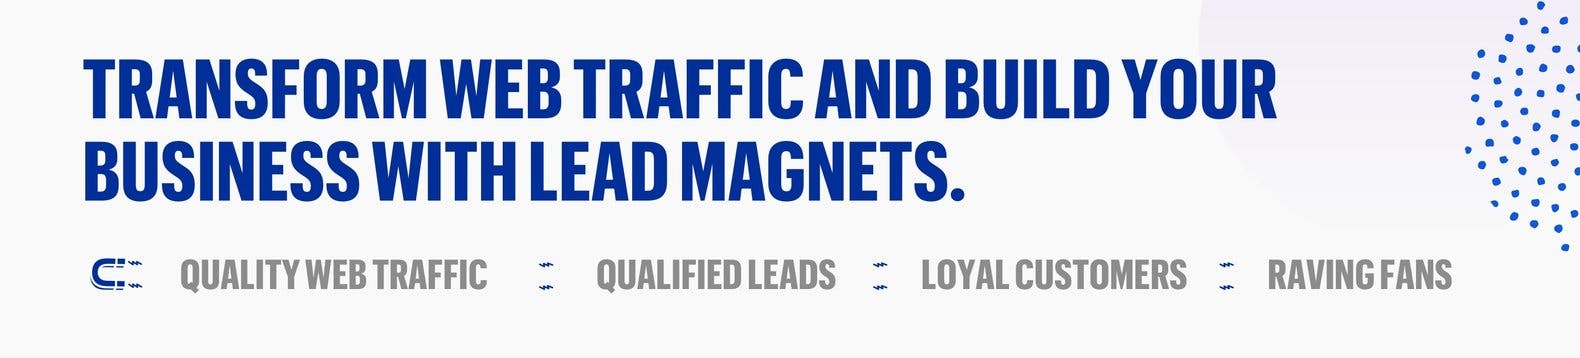 lead magnet lead generation lead pages